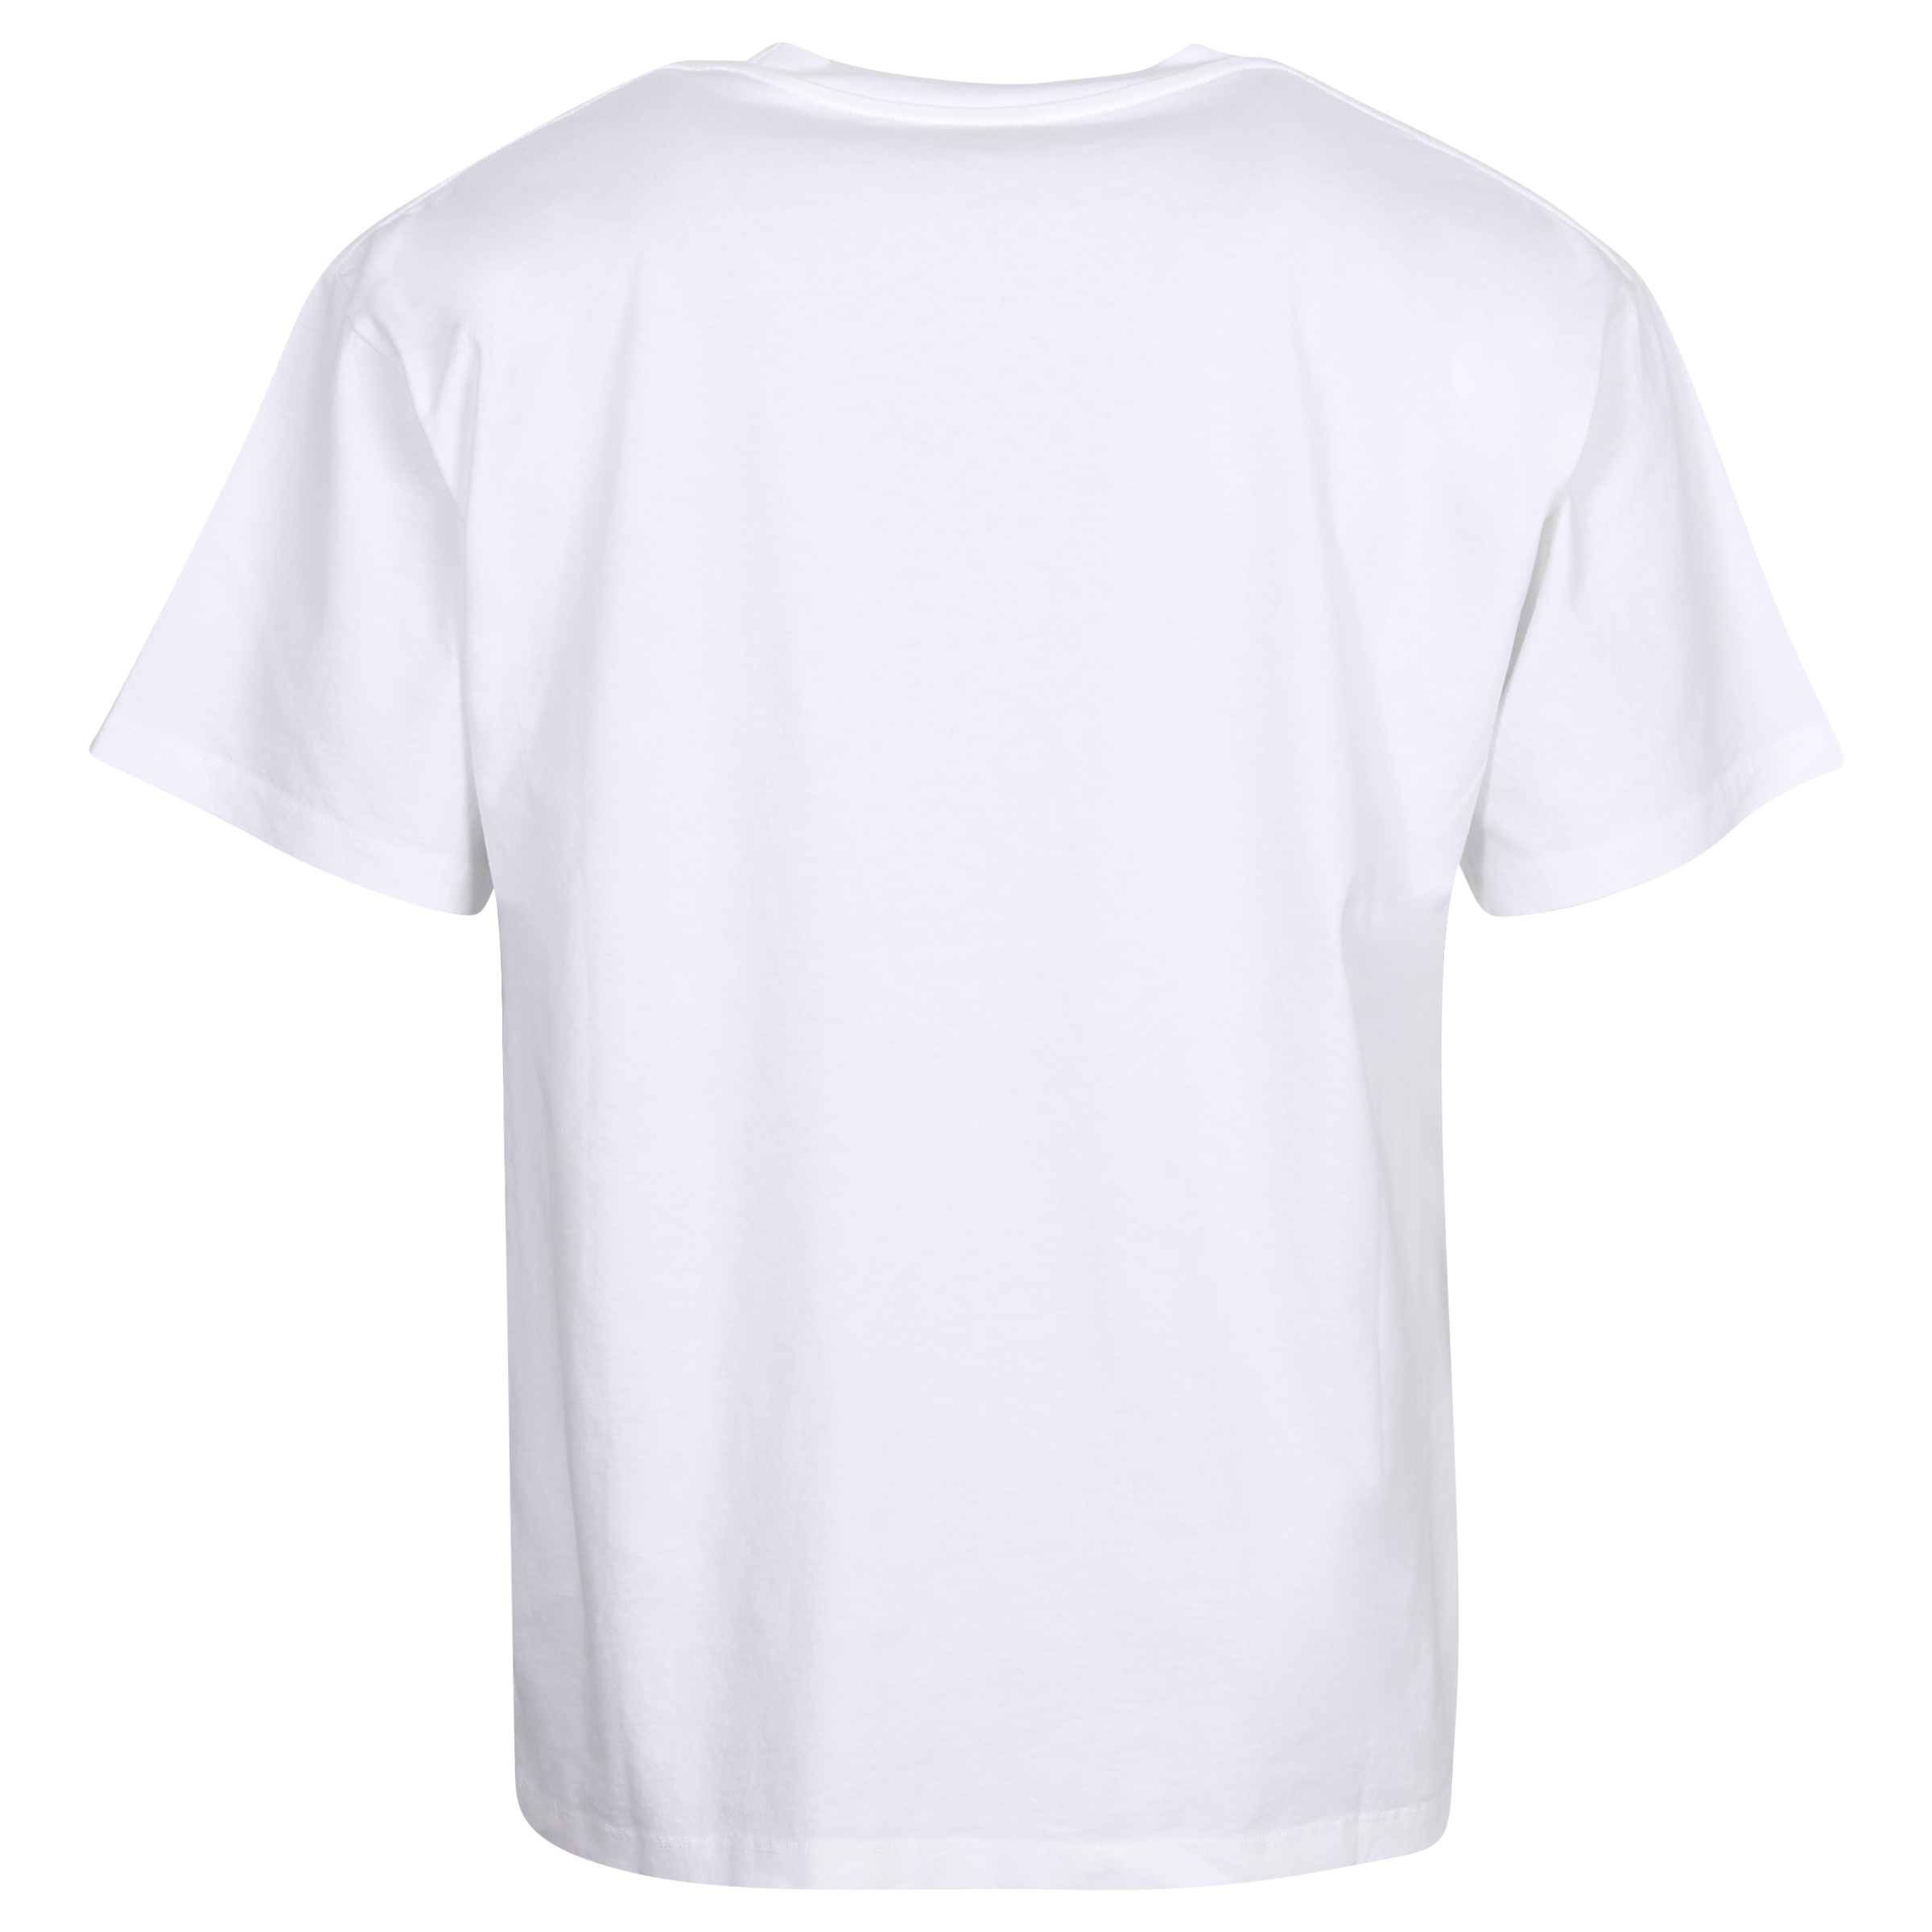 Unisex Aries Classic No Problemo T-Shirt in White